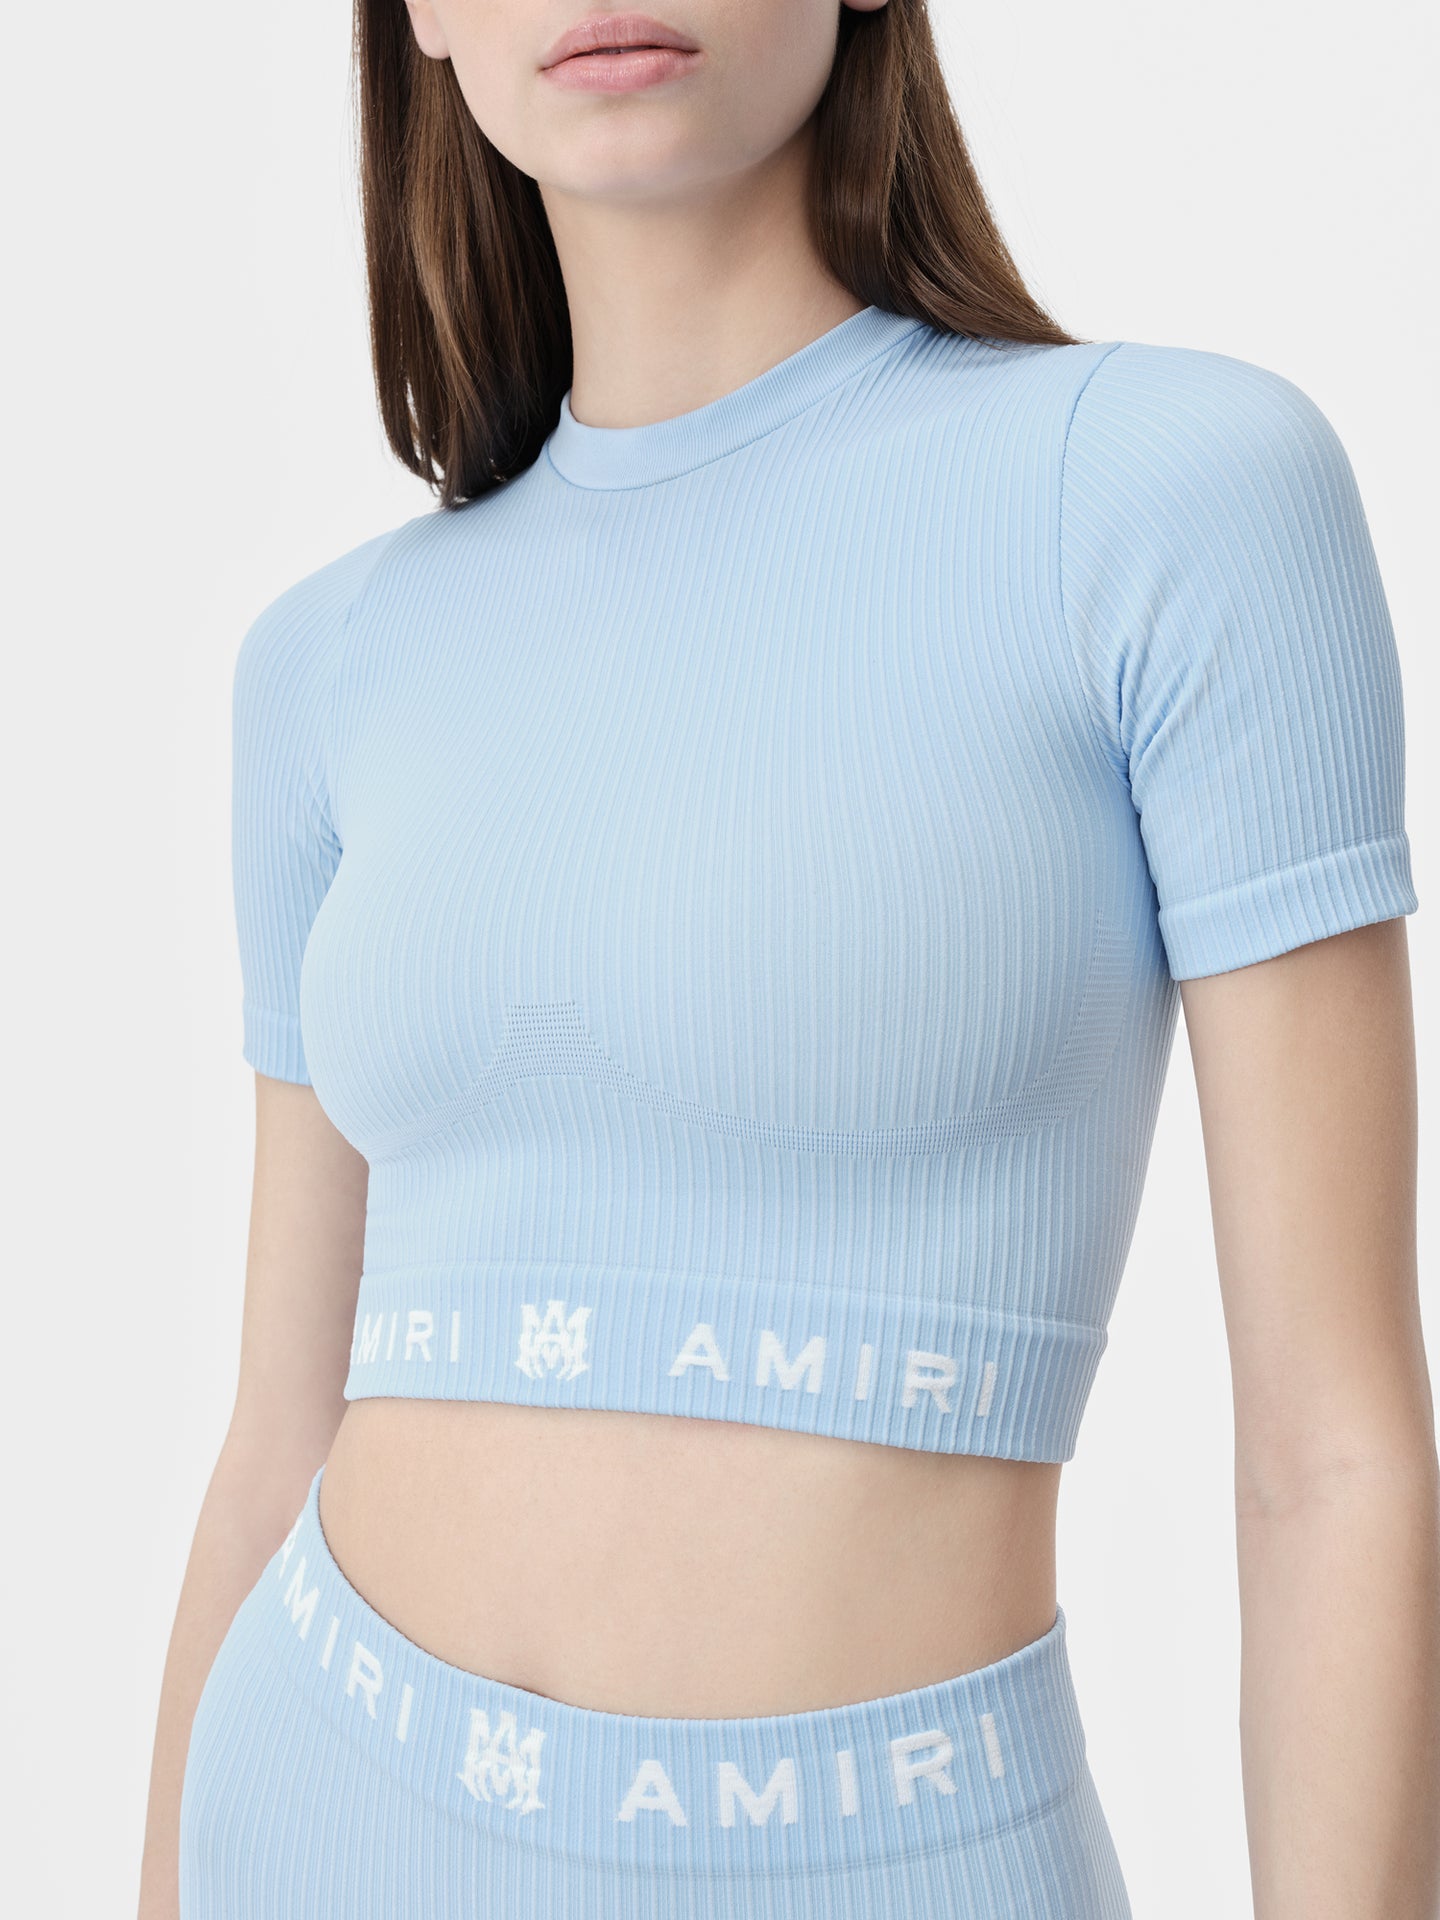 WOMEN - WOMEN'S MA RIBBED SEAMLESS S/S TOP - Cerulean